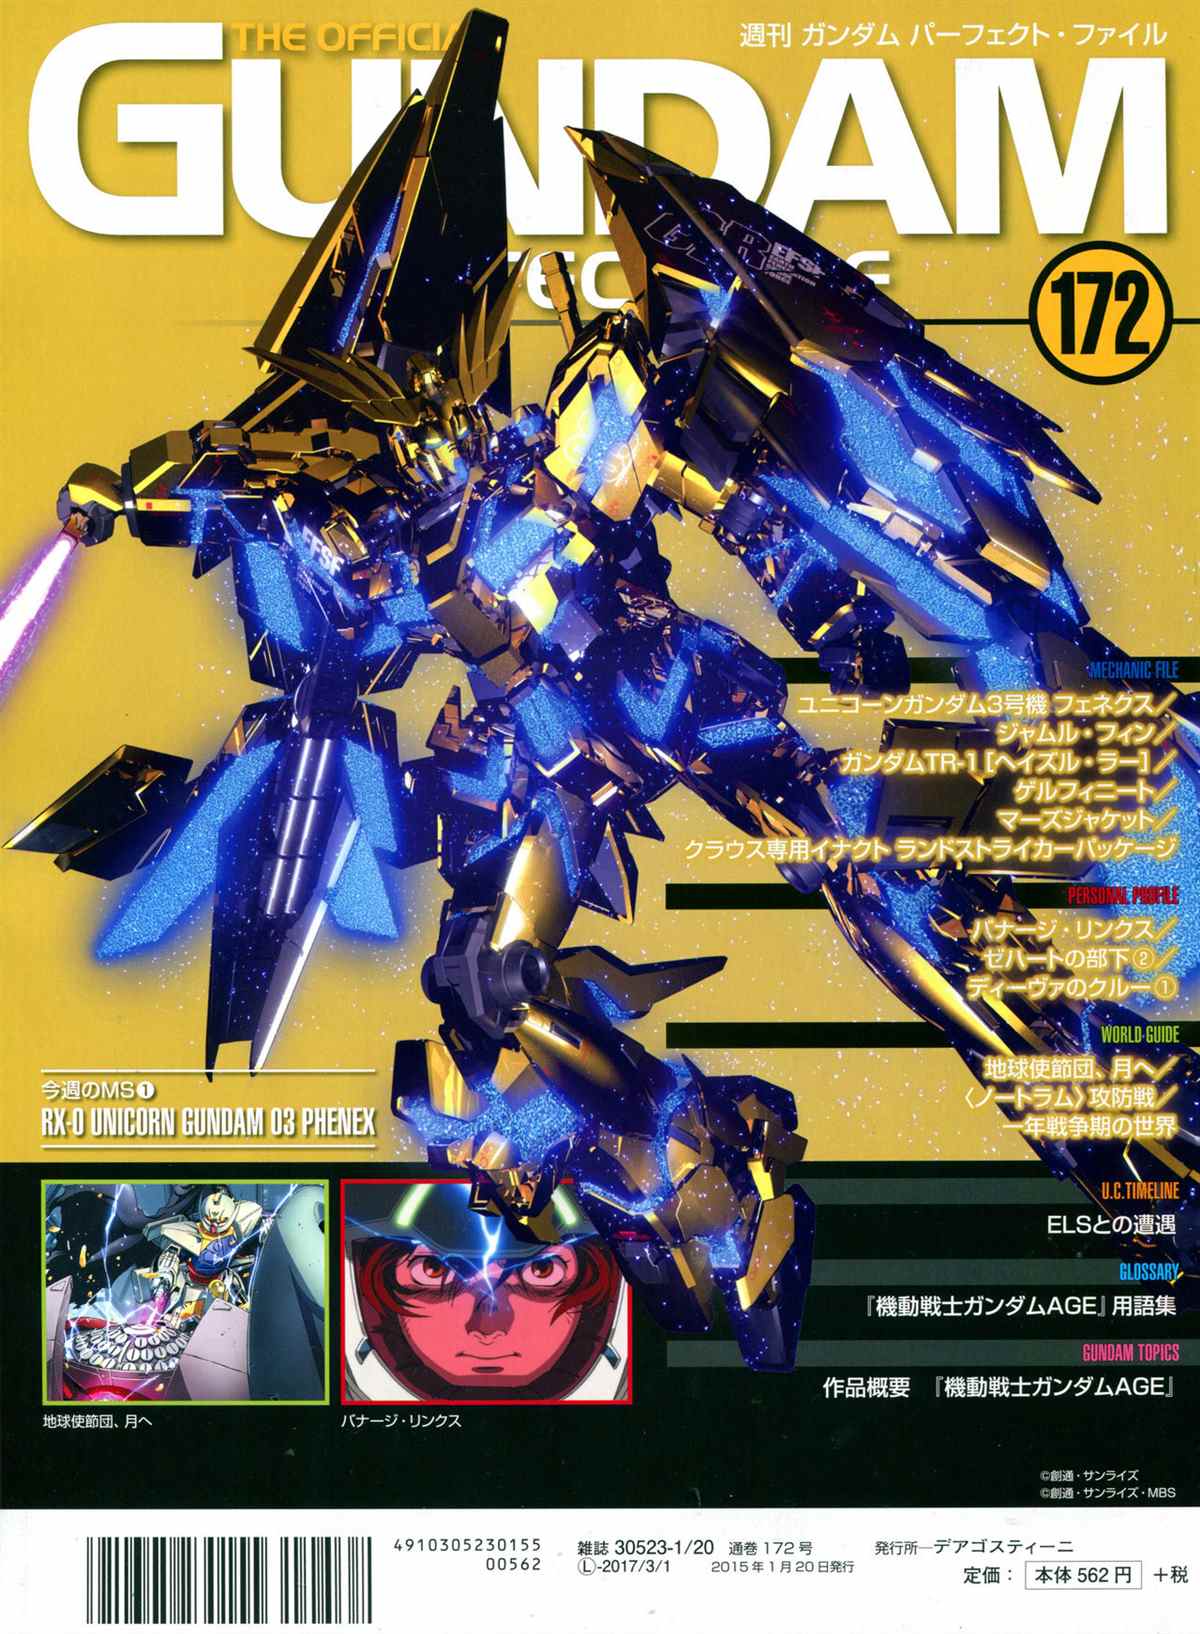 The Official Gundam Perfect File  - 第172話 - 6